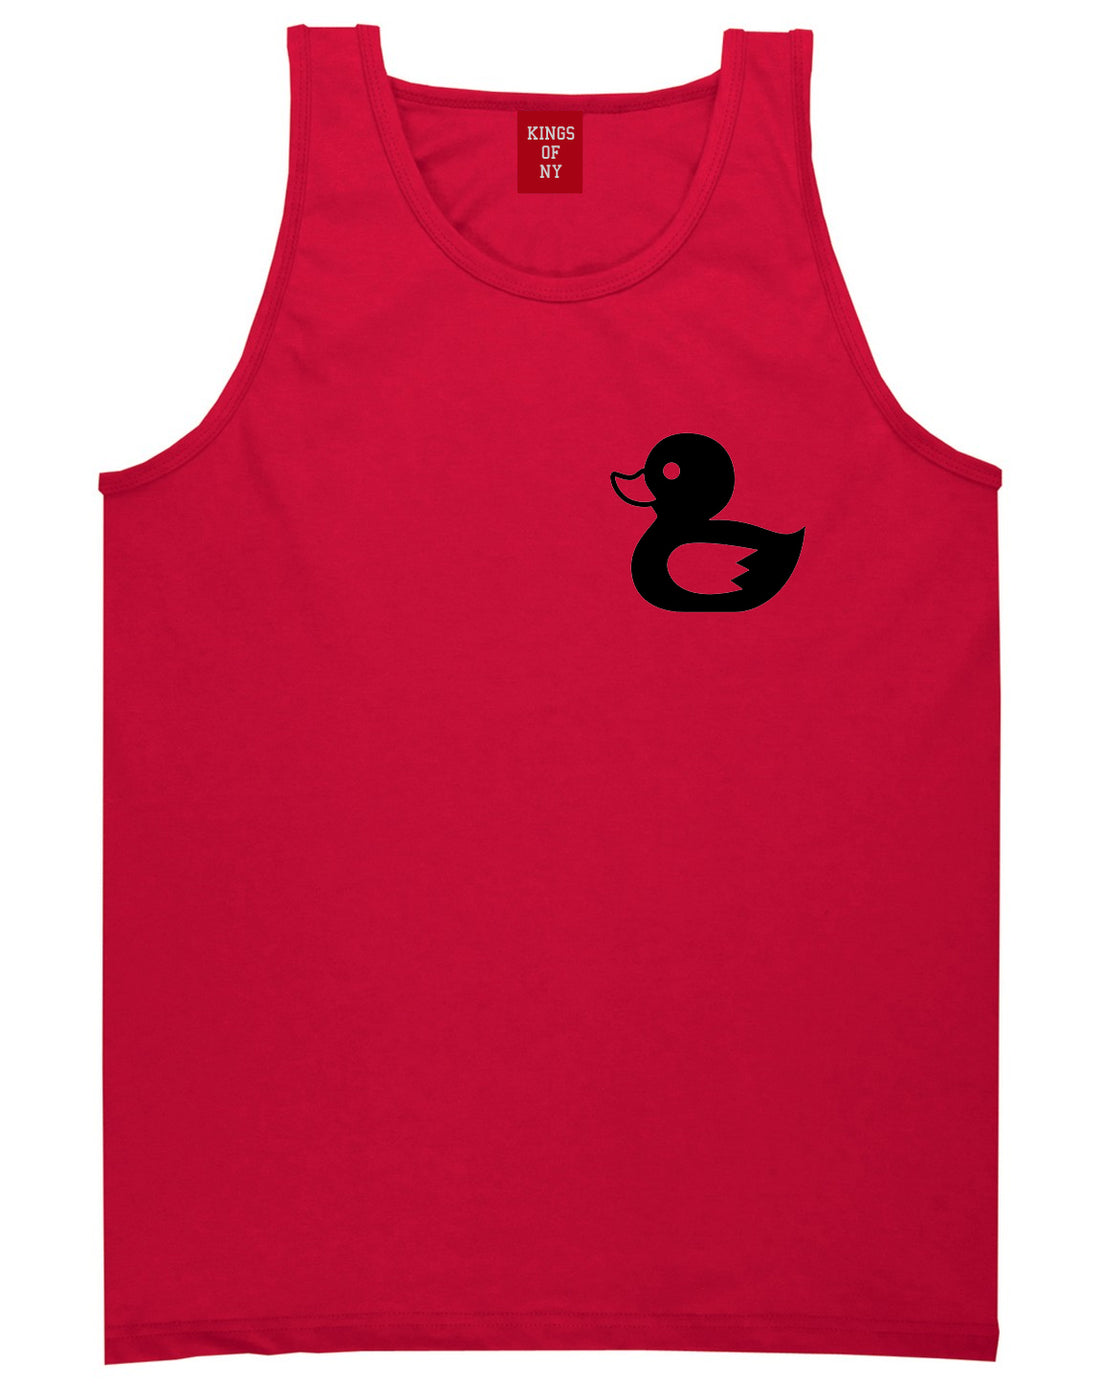 Rubber_Duck_Chest Mens Red Tank Top Shirt by Kings Of NY